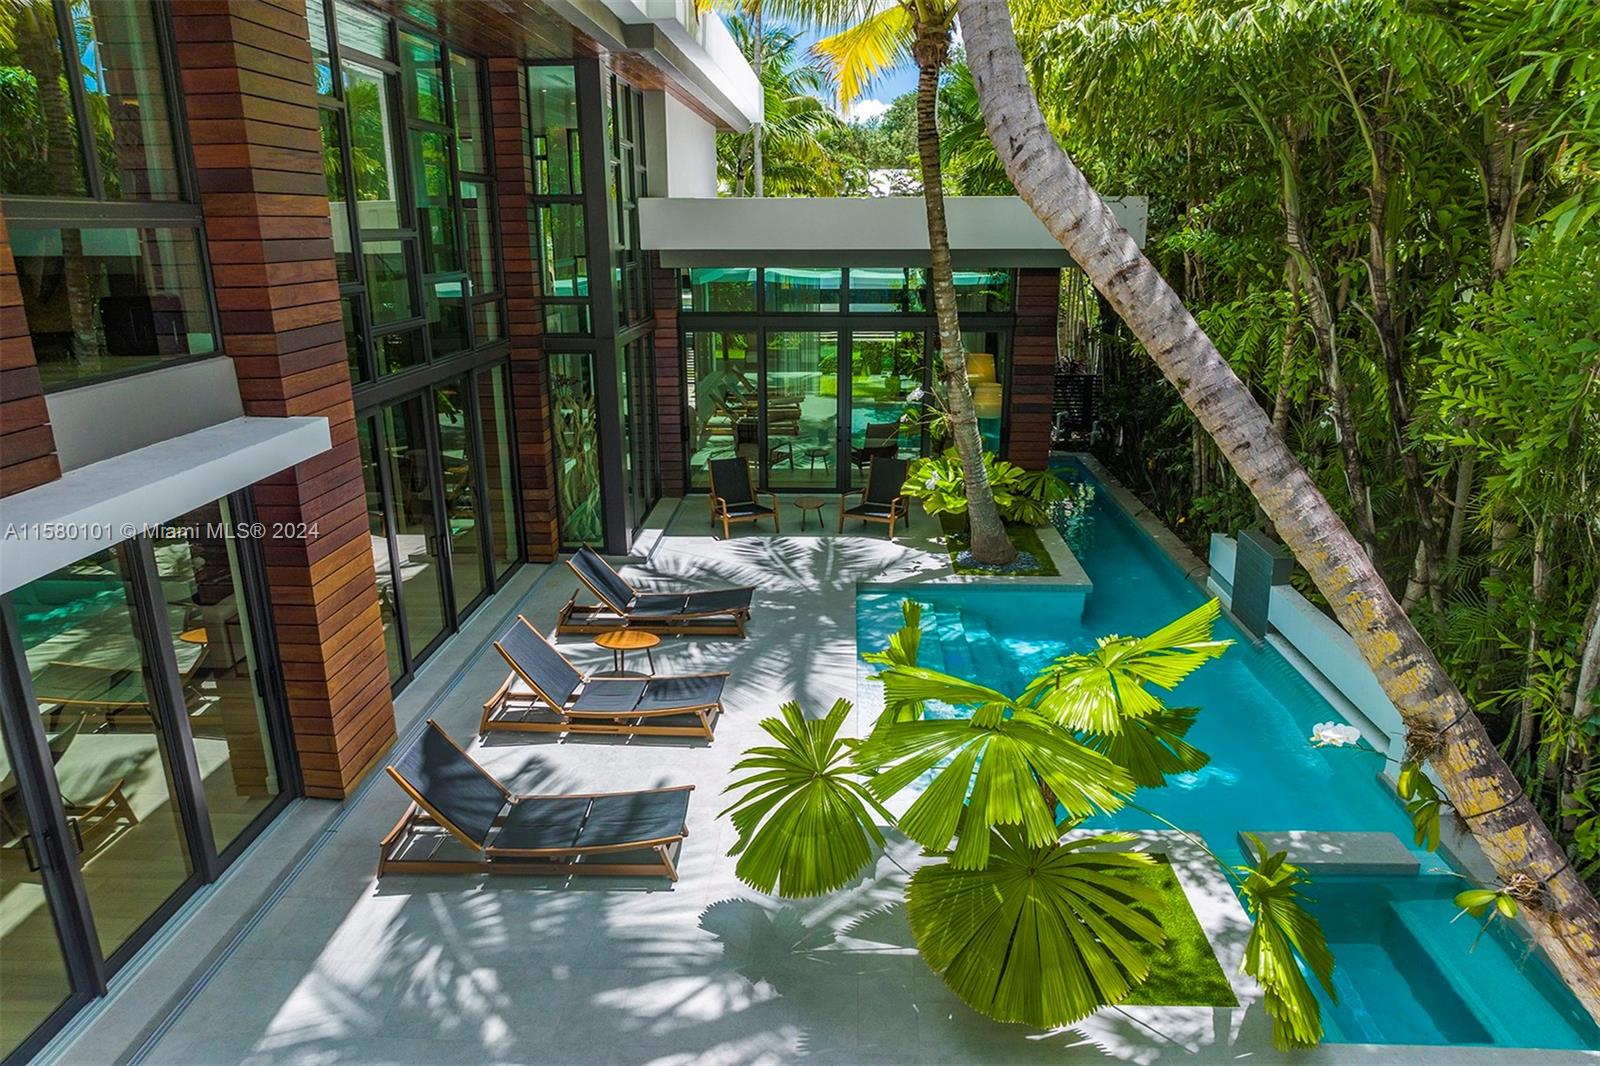 Indulge in the ultimate Coconut Grove lifestyle in this extraordinary modern estate by renowned architect Charles Treister. Perched atop a ridge 21 ft above sea level and surrounded by a lush garden, this unique Tri-Level home seamlessly blends indoor and outdoor spaces for a tranquil tropical experience. Boasting an array of meticulous details and exquisite craftsmanship, you'll be captivated by a spectacular floorplan with 7 bedrooms and 7/2 bathrooms, rare to find basement w/ A/C, separate guest suite apartment, elevator, and exquisite finishes throughout. Experience an outdoor oasis with glowing pool & spa, covered terrace, summer kitchen and outdoor shower. This modern smart home offers it all with a full house generator, 2 car garage in desirable North Grove and prestigious schools.